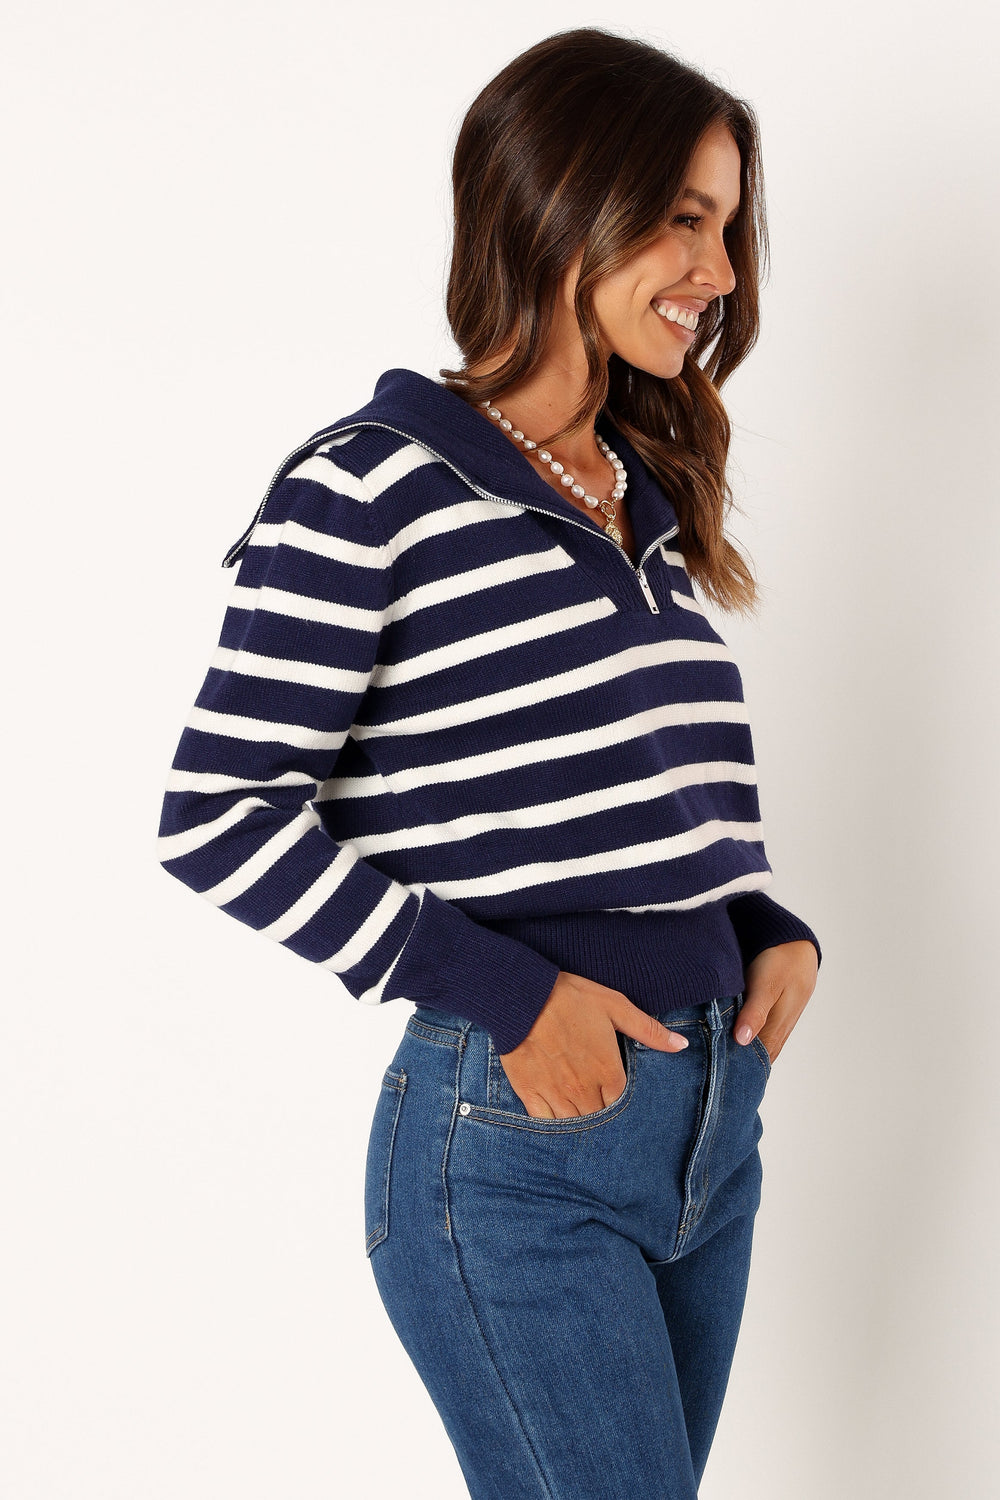 Petal and Pup USA KNITWEAR Guinevere Striped Quarter Zip - Navy White